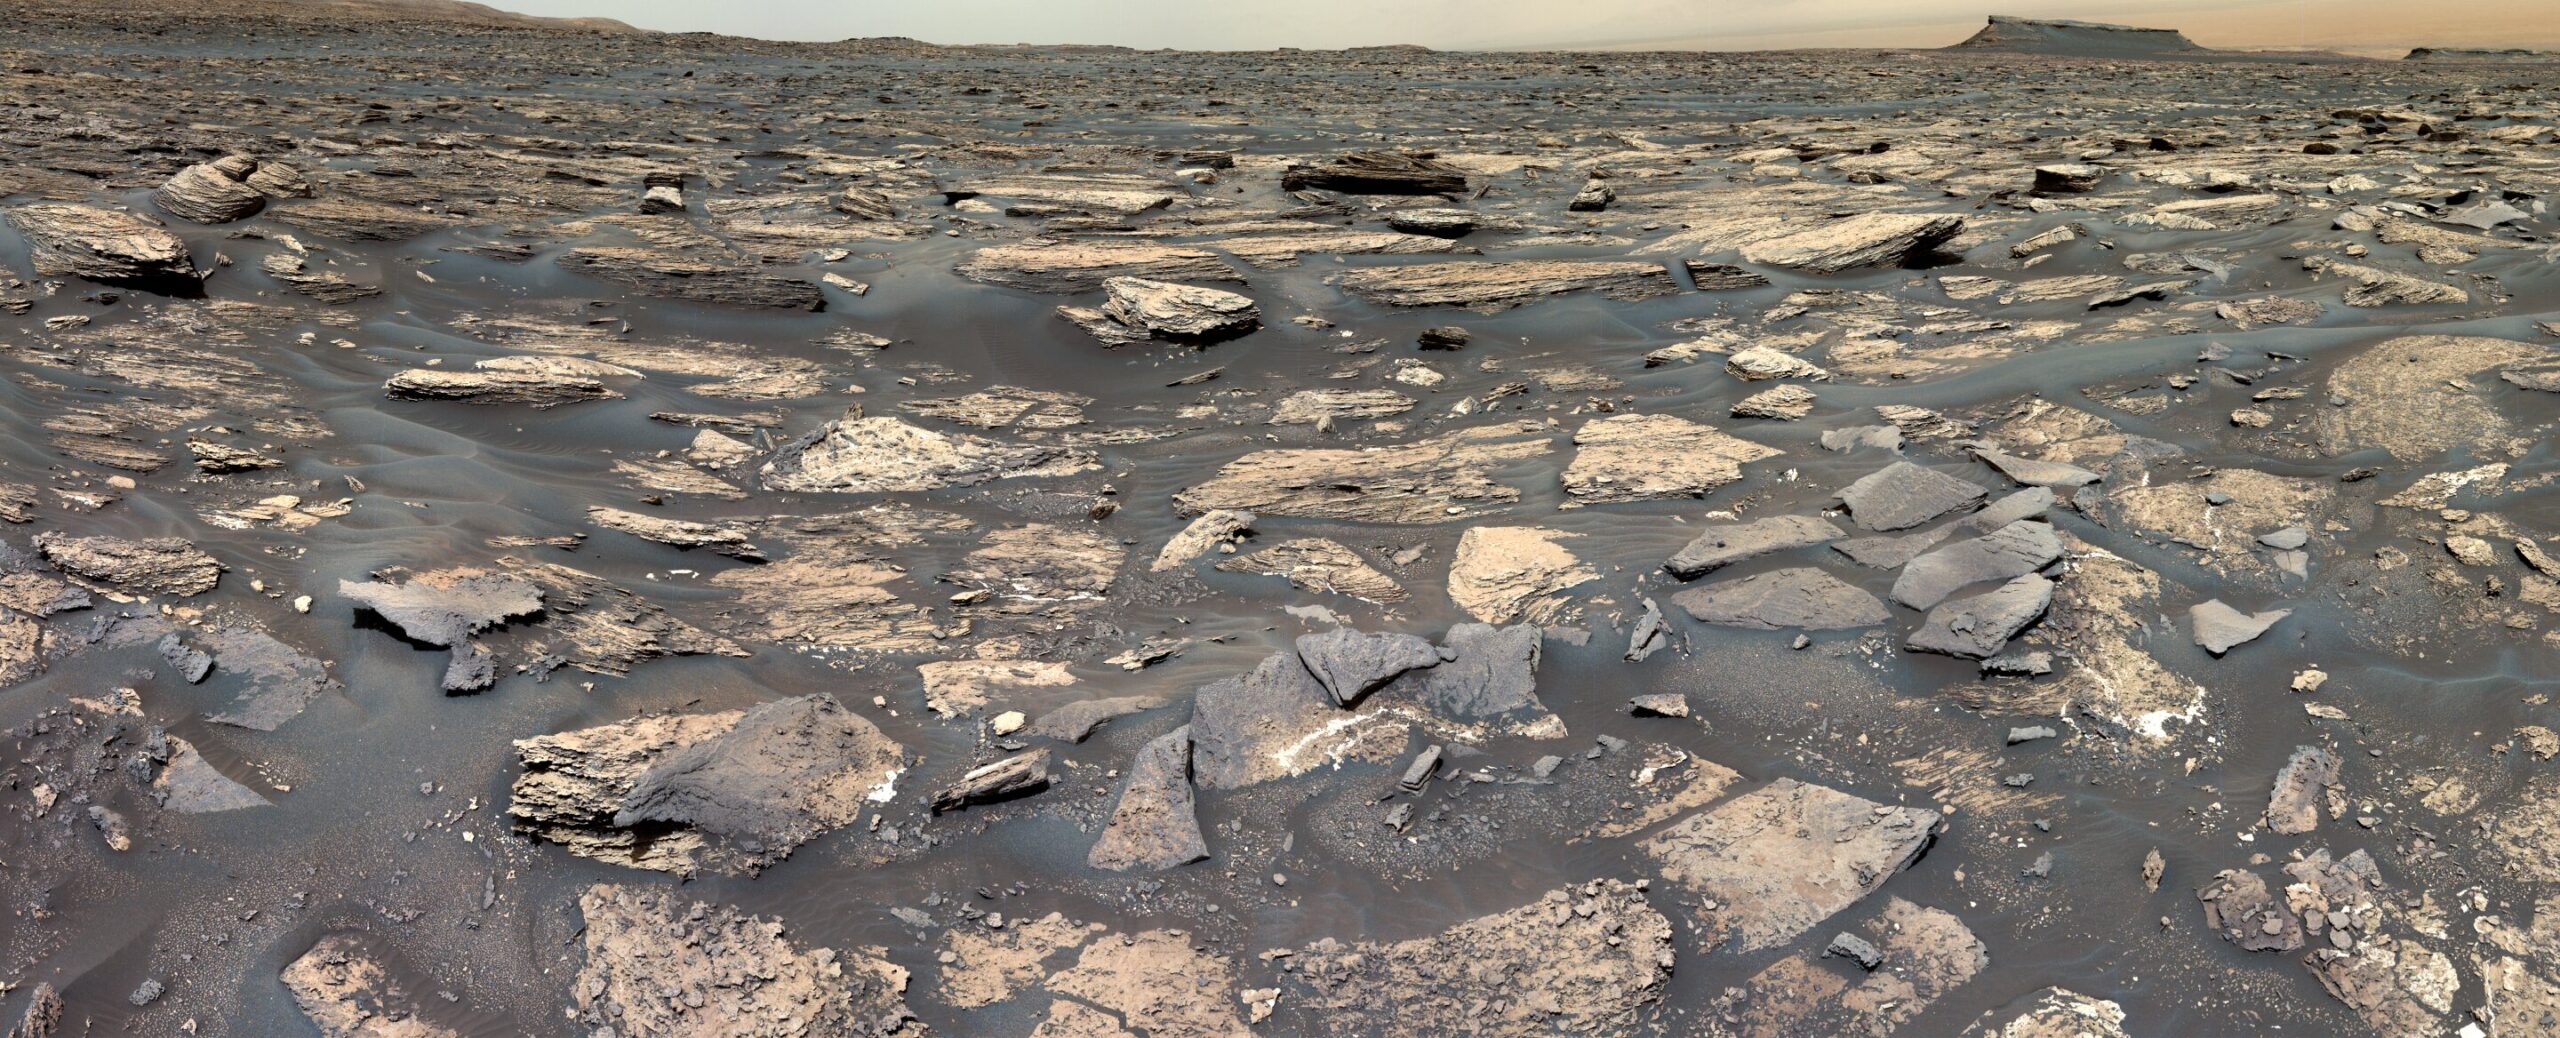 New evidence of Mars’ similarity to Earth in the past emerges